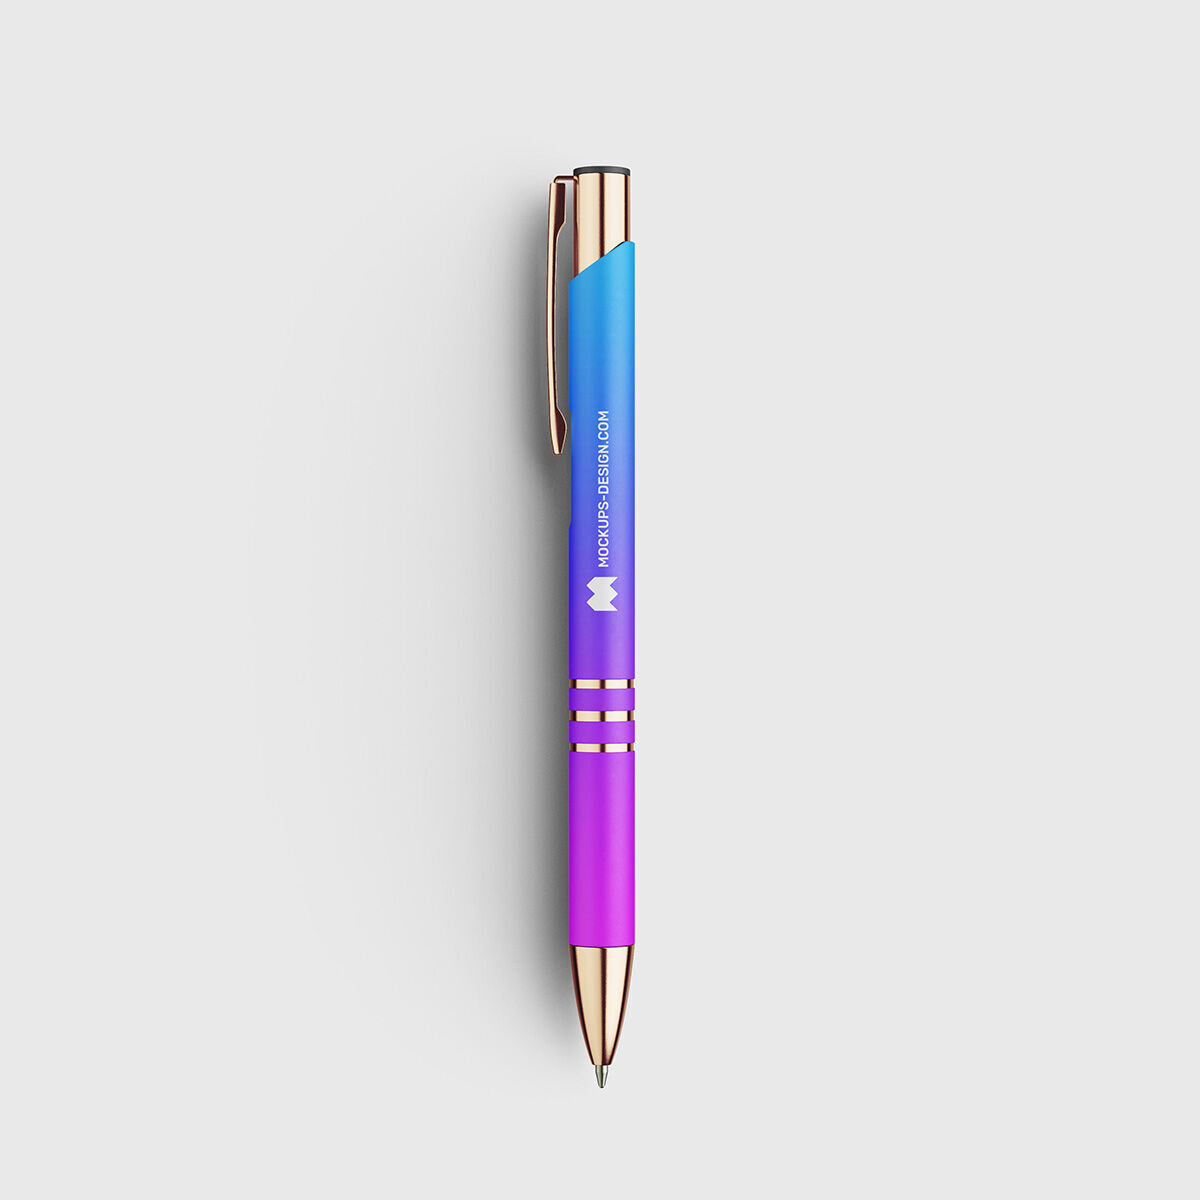 2 Colorful Pen Mockup Next To Each Other FREE PSD